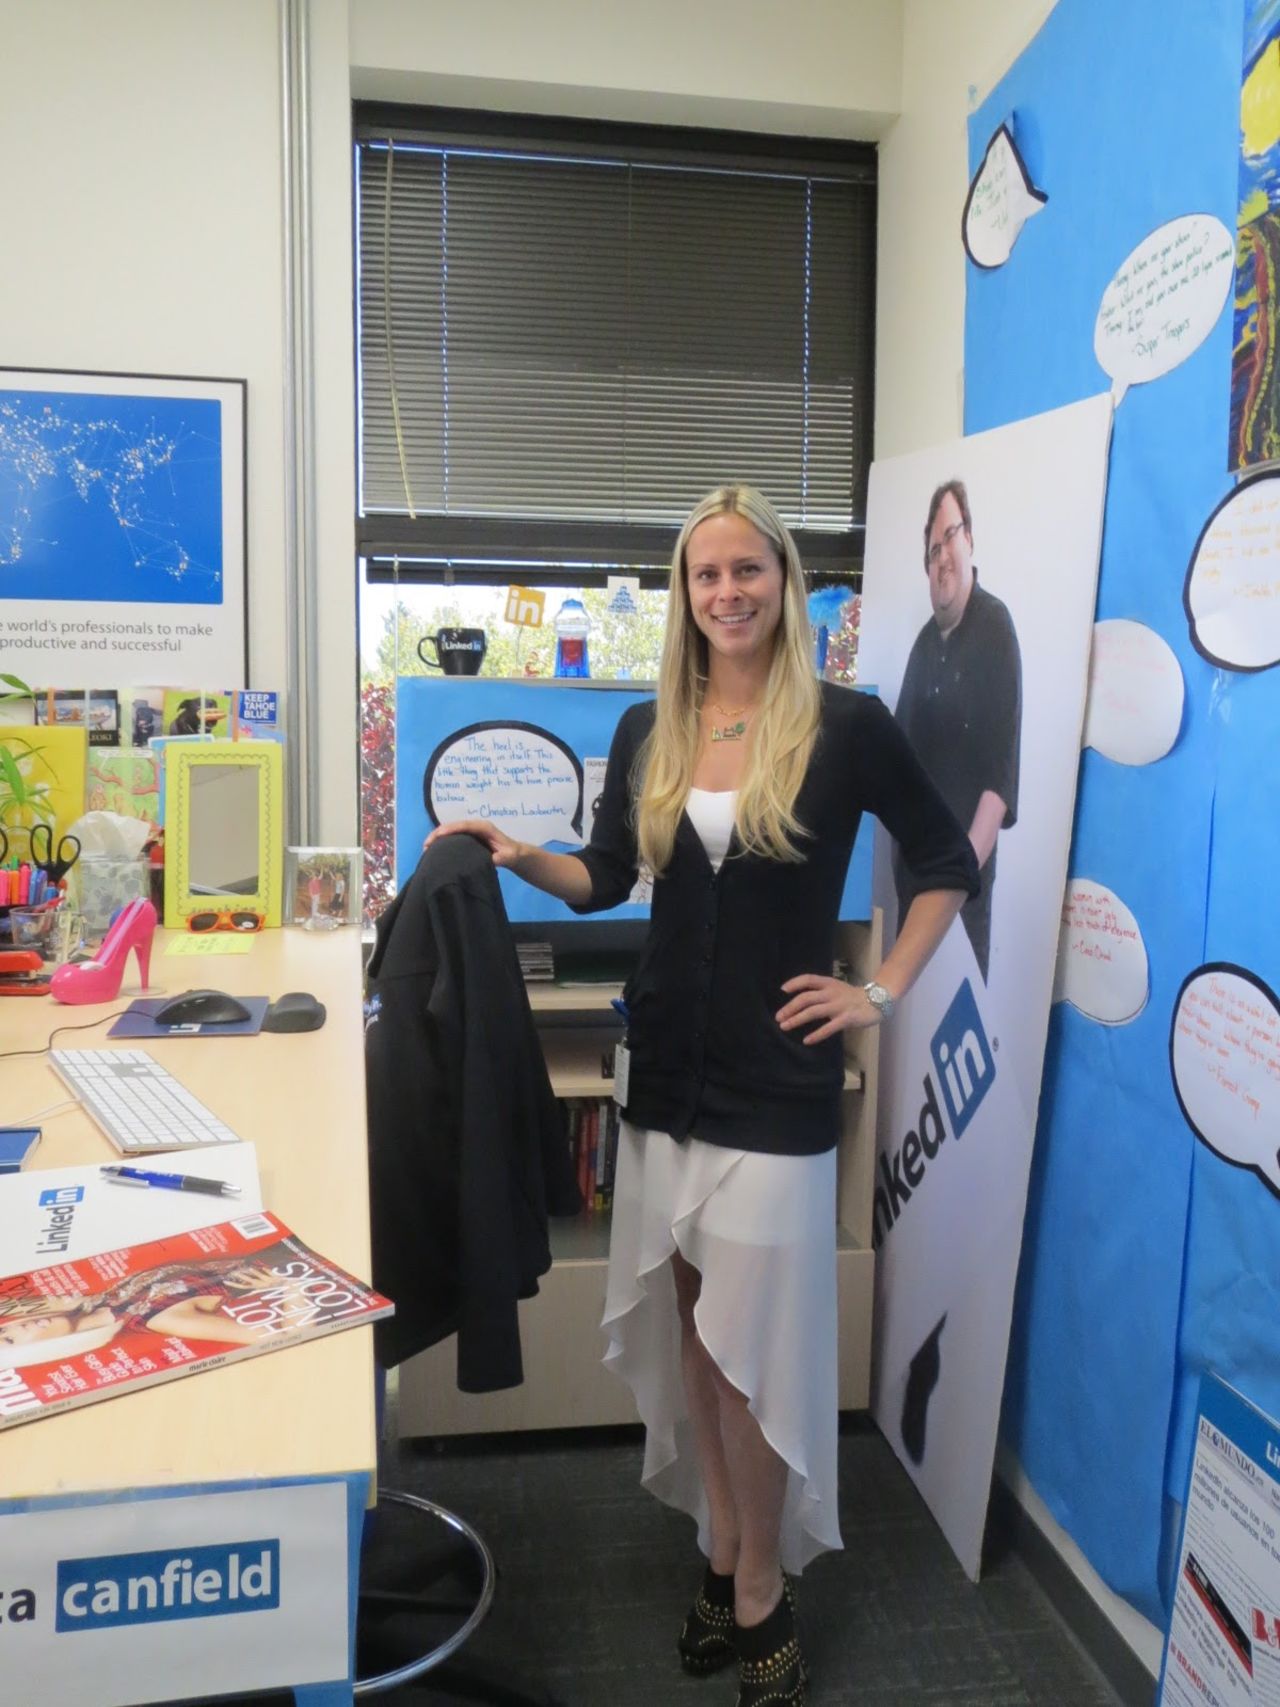 LinkedIn corporate communications senior manager Krista Canfield keeps a life-size photo of LinkedIn founder Reid Hoffman in her desk area. 